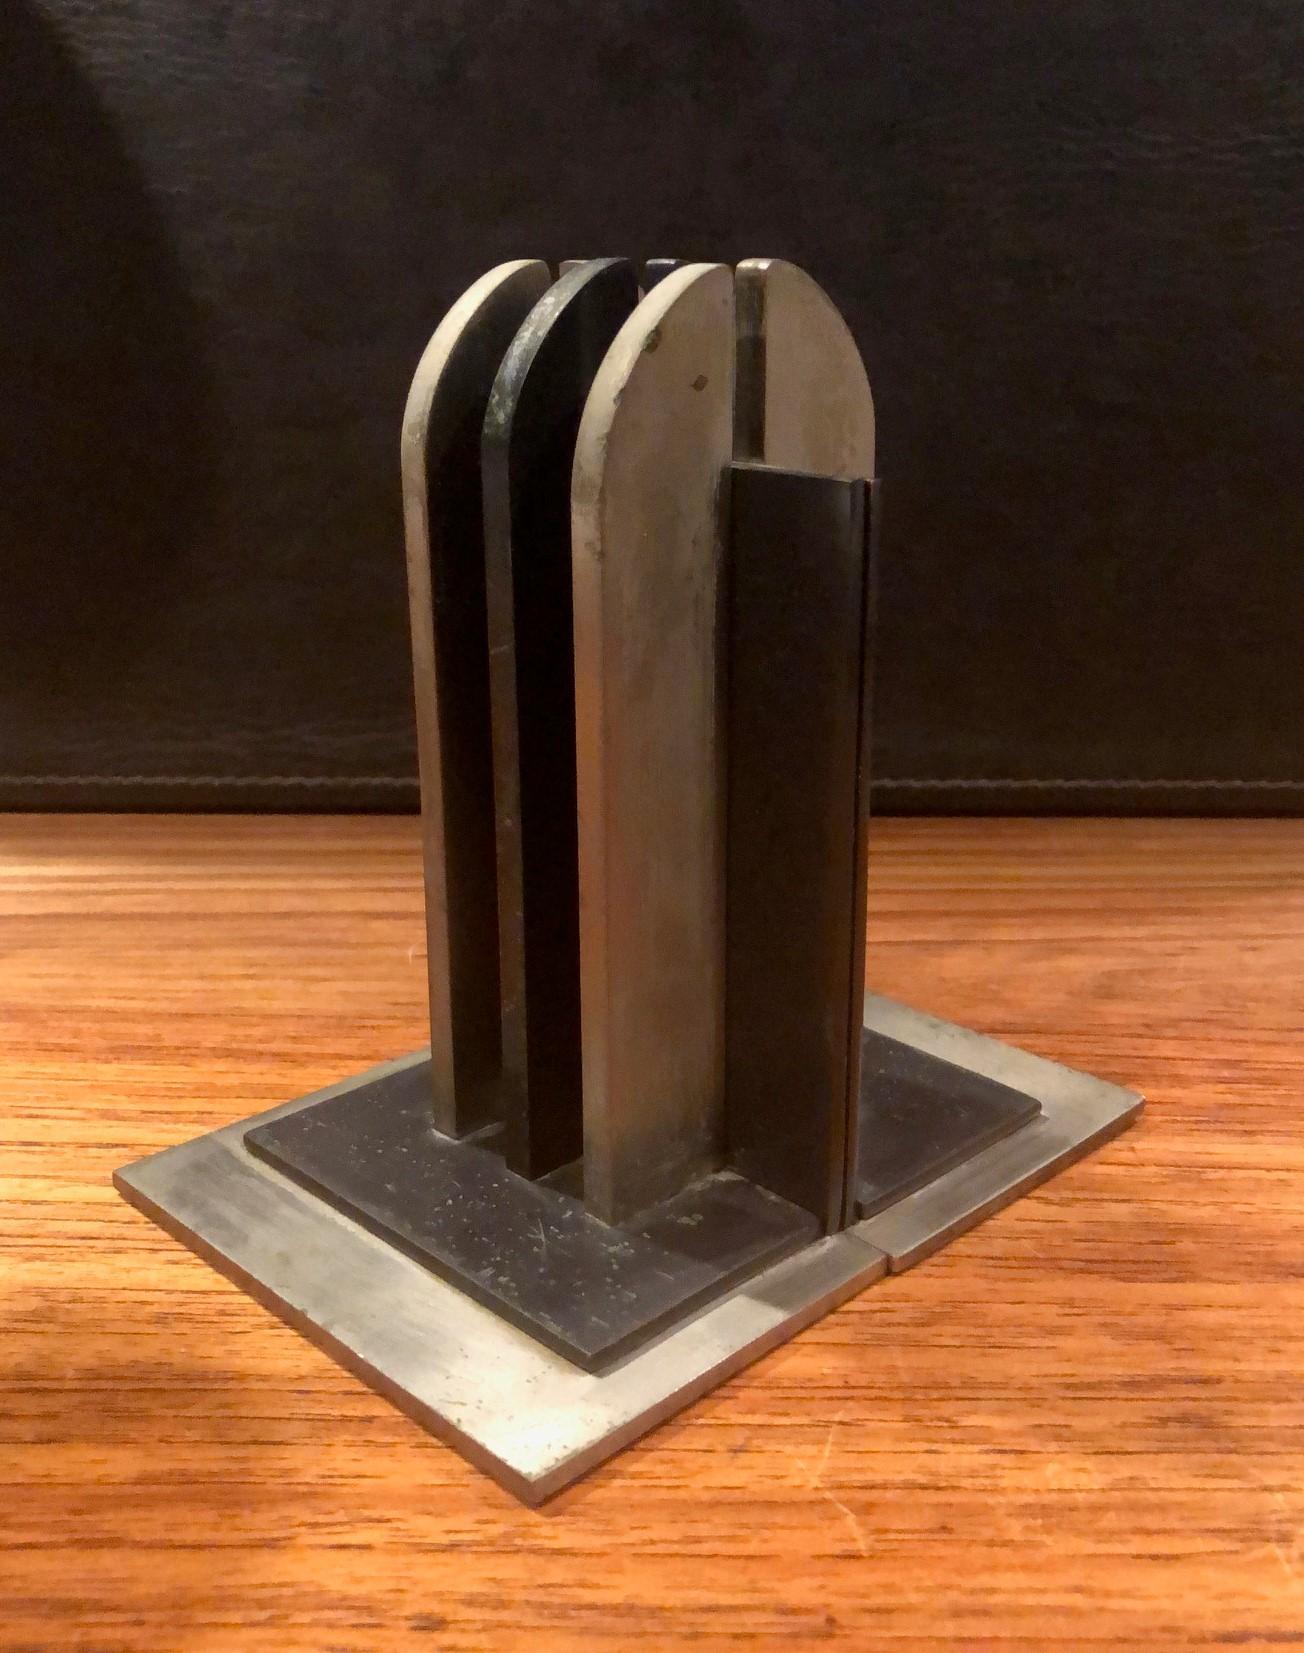 Pair of Machine Age Art Deco Bookends by Walter Von Nessen for Chase & Co. No 2